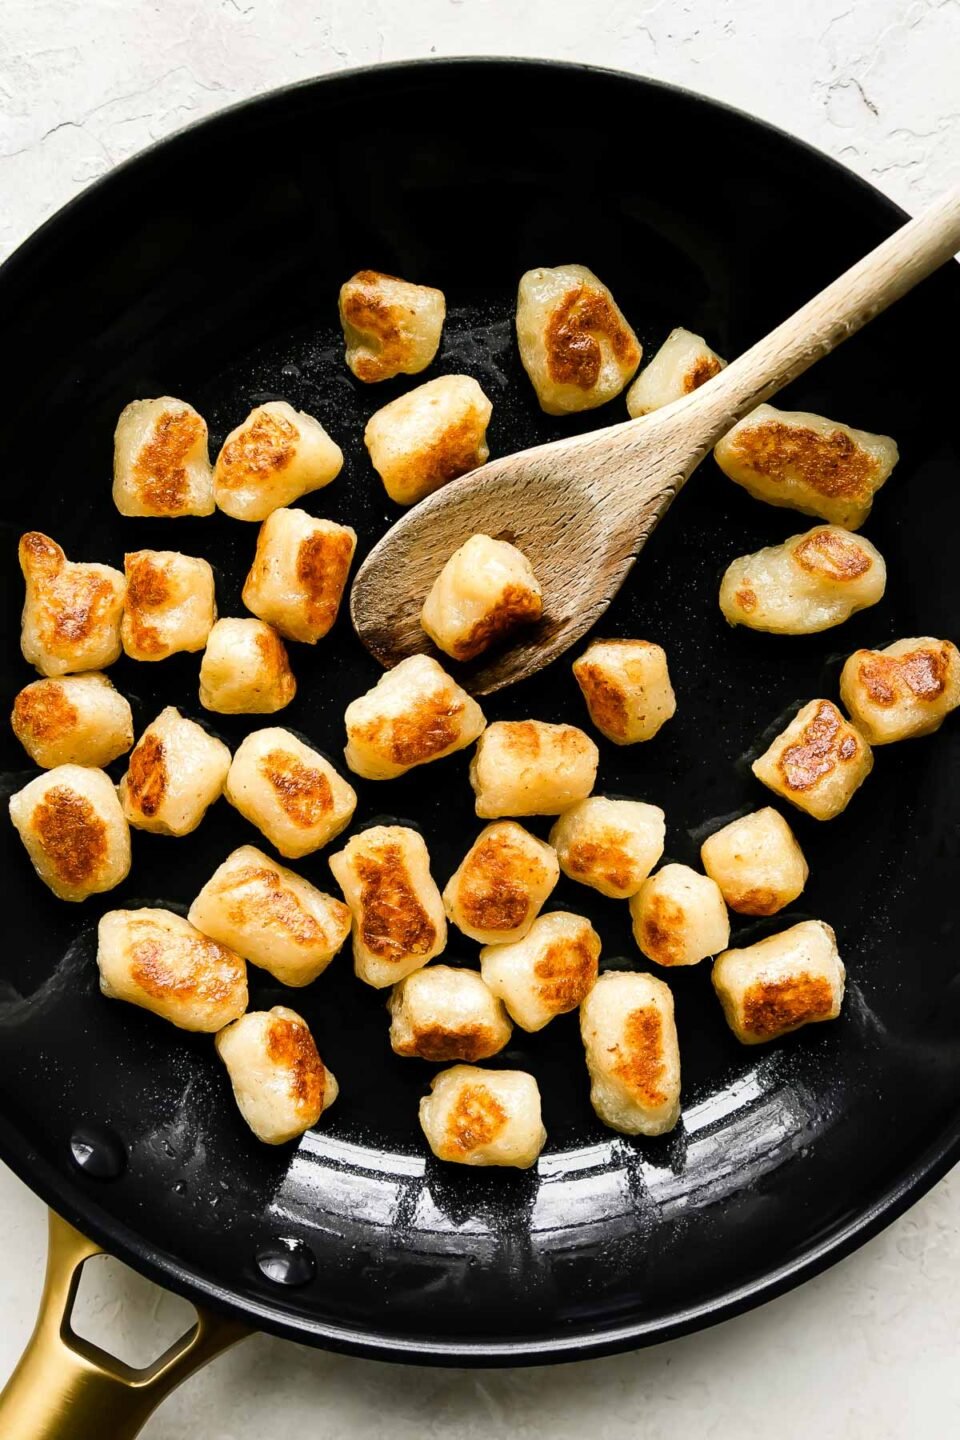 Cauliflower gnocchi fills a large black nonstick skillet that sits atop a creamy white textured surface. A wooden spoon rests inside of the skillet for stirring.